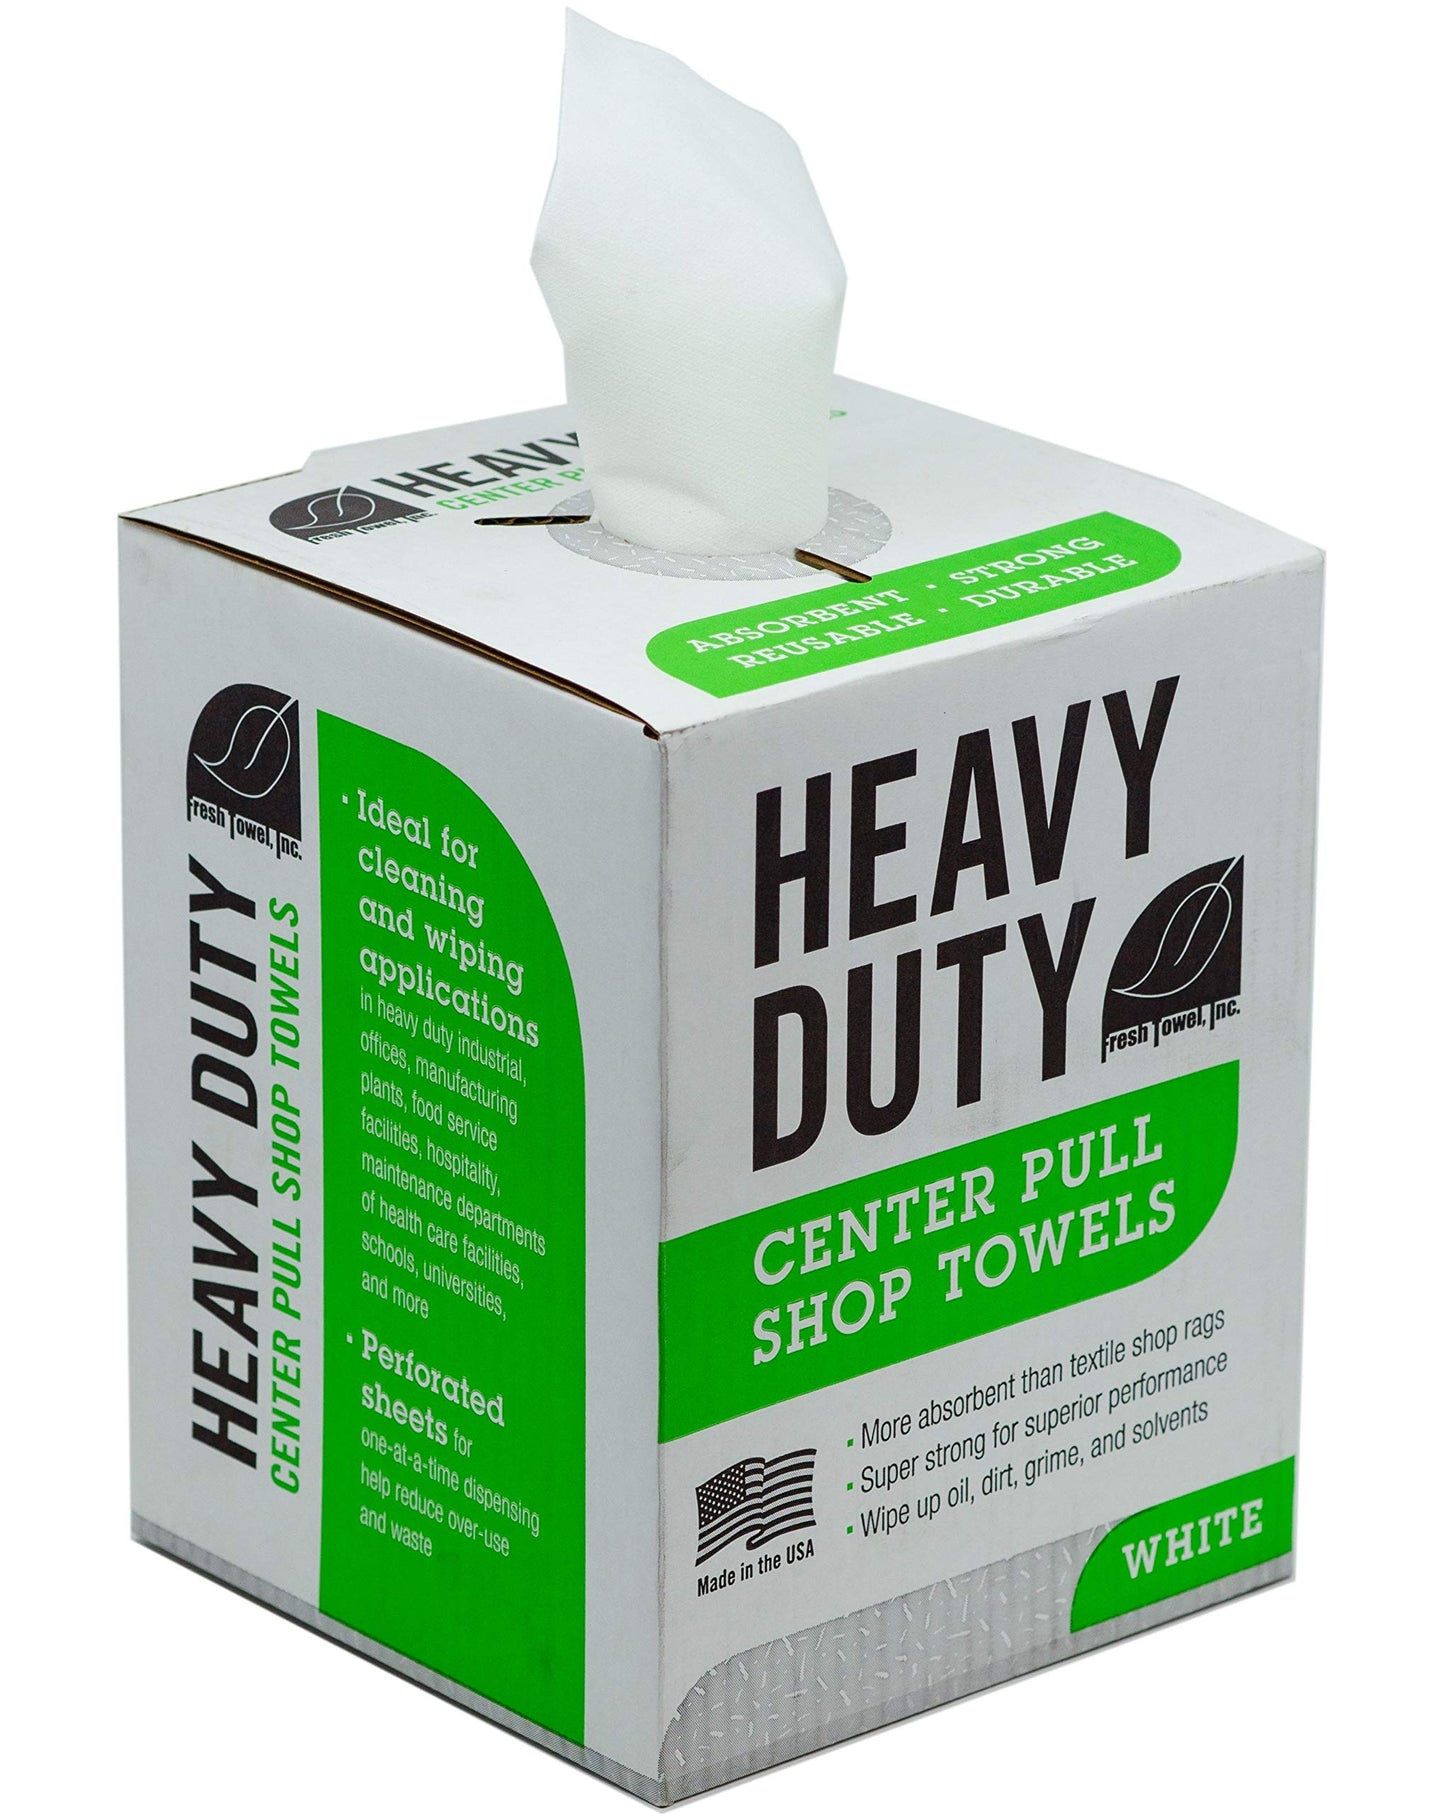 Fresh Towel Heavy Duty Center Pull Shop Towel Rags for Cleaning- (1 Box of 160 Sheets) Disposable Cleaning Towels - 9 x 12 inches - FT800 (White)